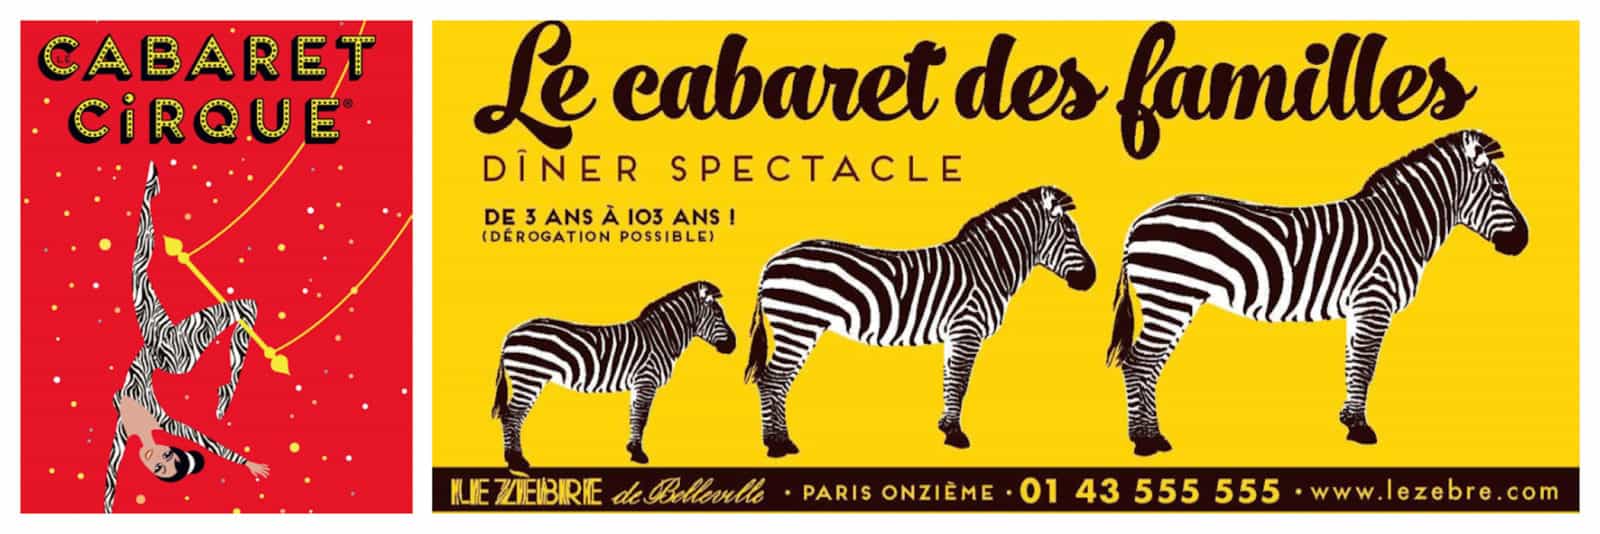 Posters for kid-friendly cabarets in Paris like the Cabaret du Cirque (right) and the Cabaret des Familles (left), perfect for a rainy day with kids in Paris.